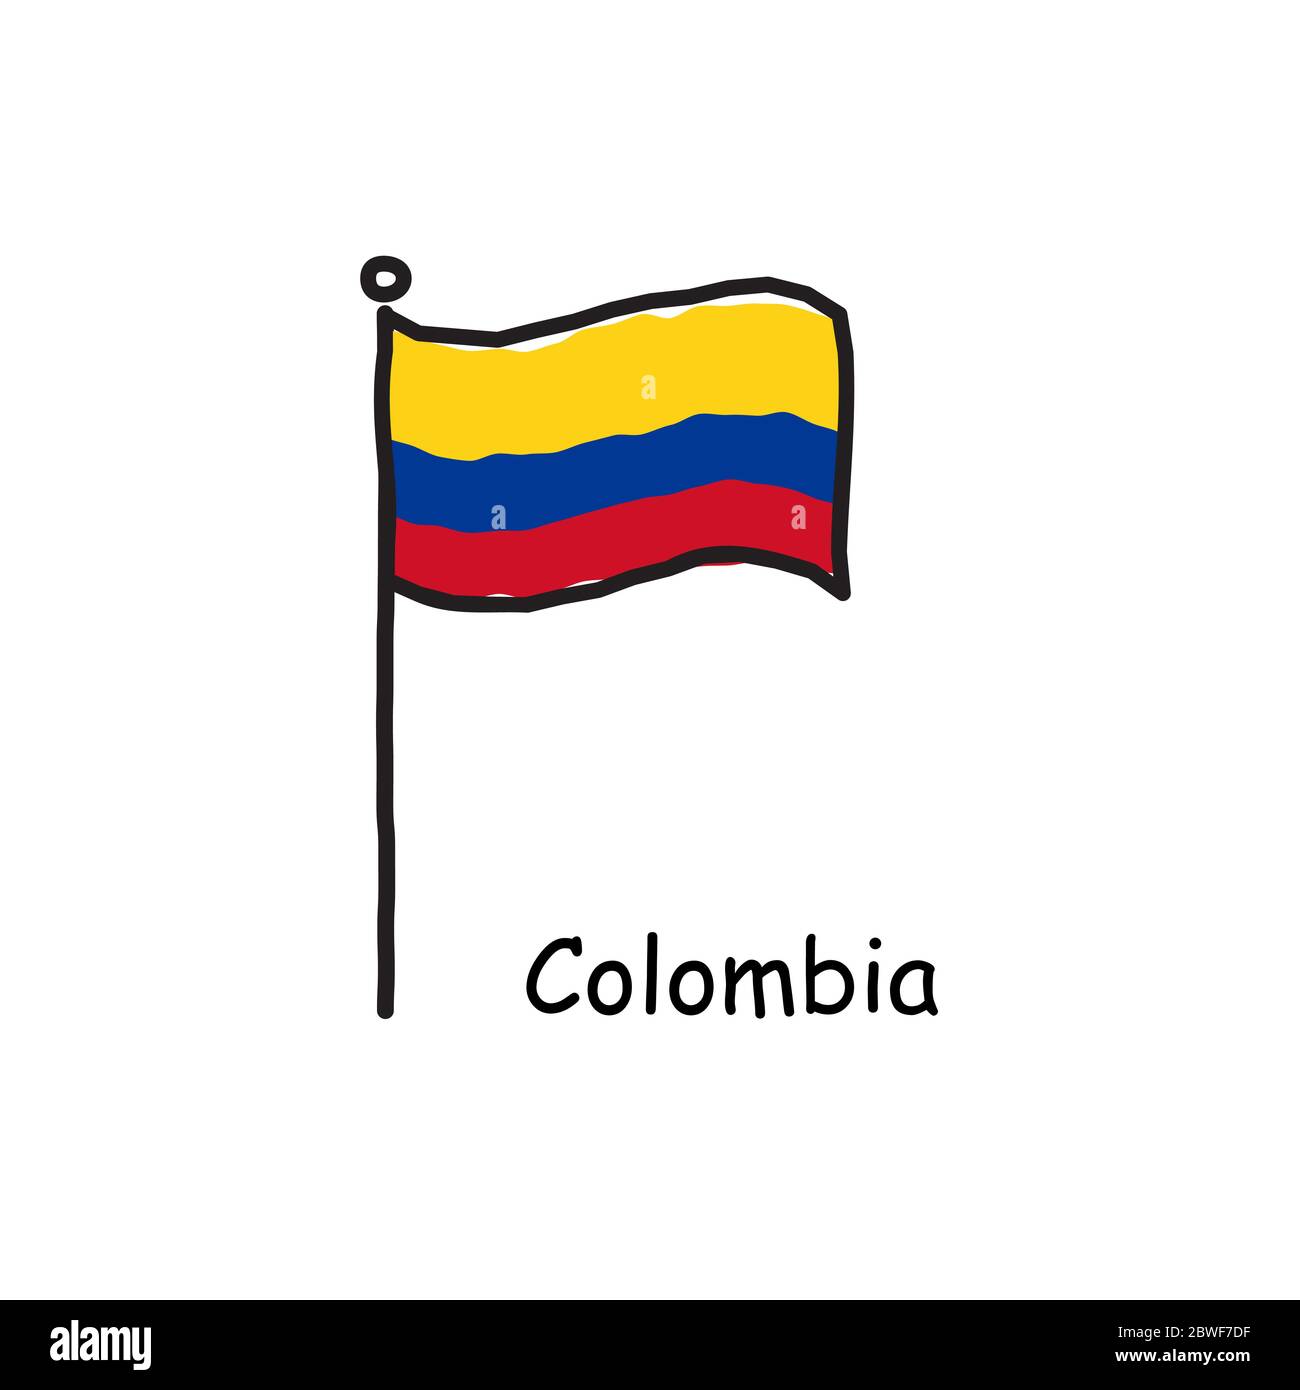 hand drawn sketchy Colombia flag on the flag pole. three color flag . Stock Vector illustration isolated on white background. Stock Vector